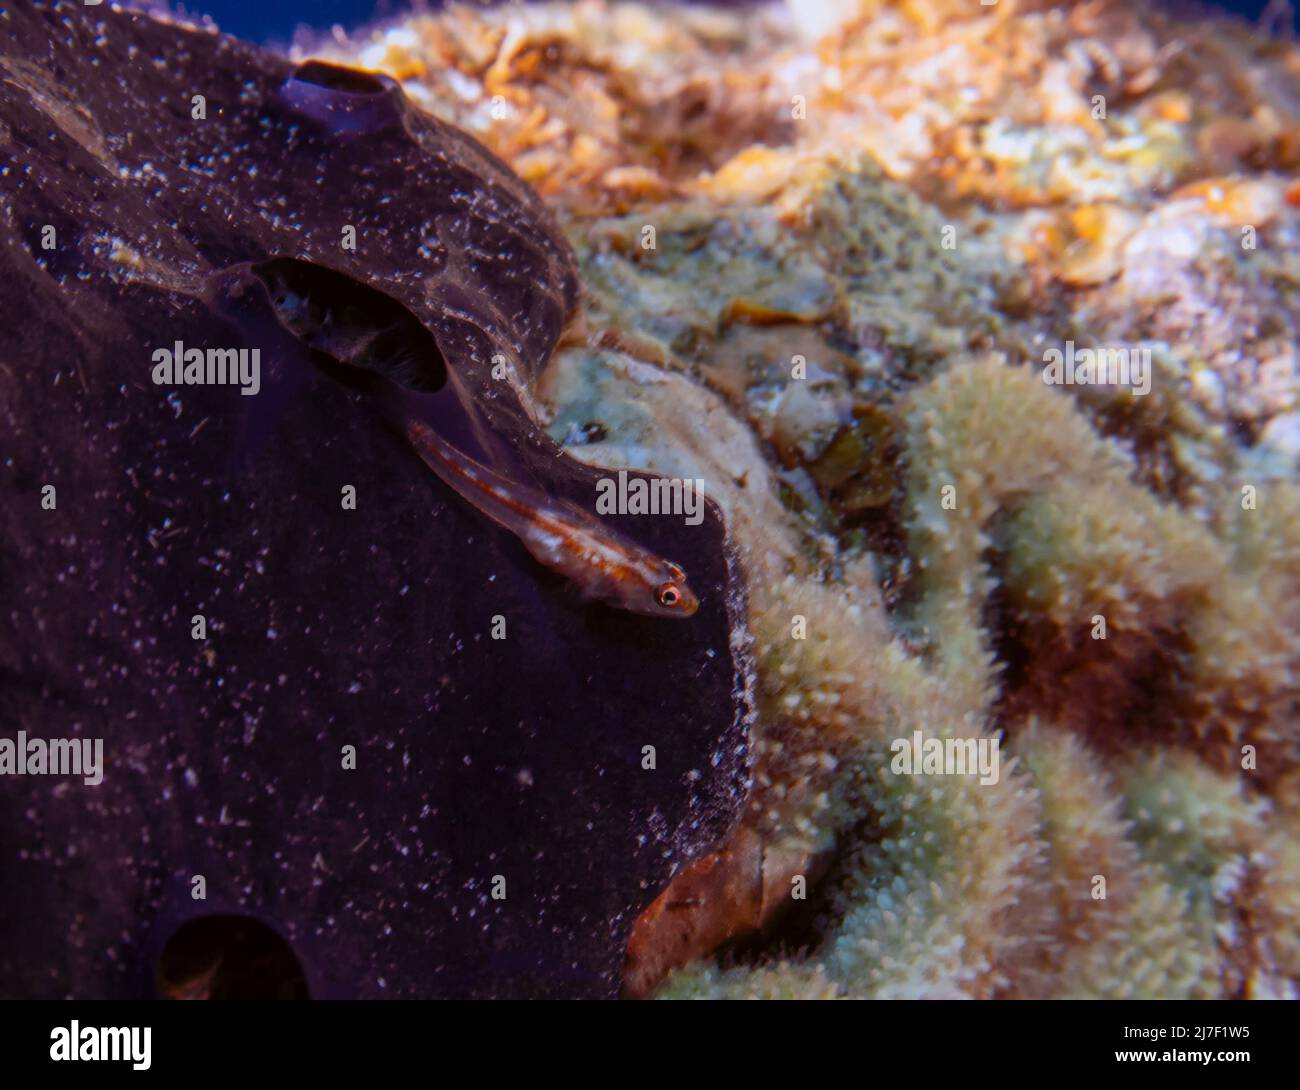 A Mozambique Ghost Goby (Pleurosicya mossambica) in the Red Sea, Egypt Stock Photo